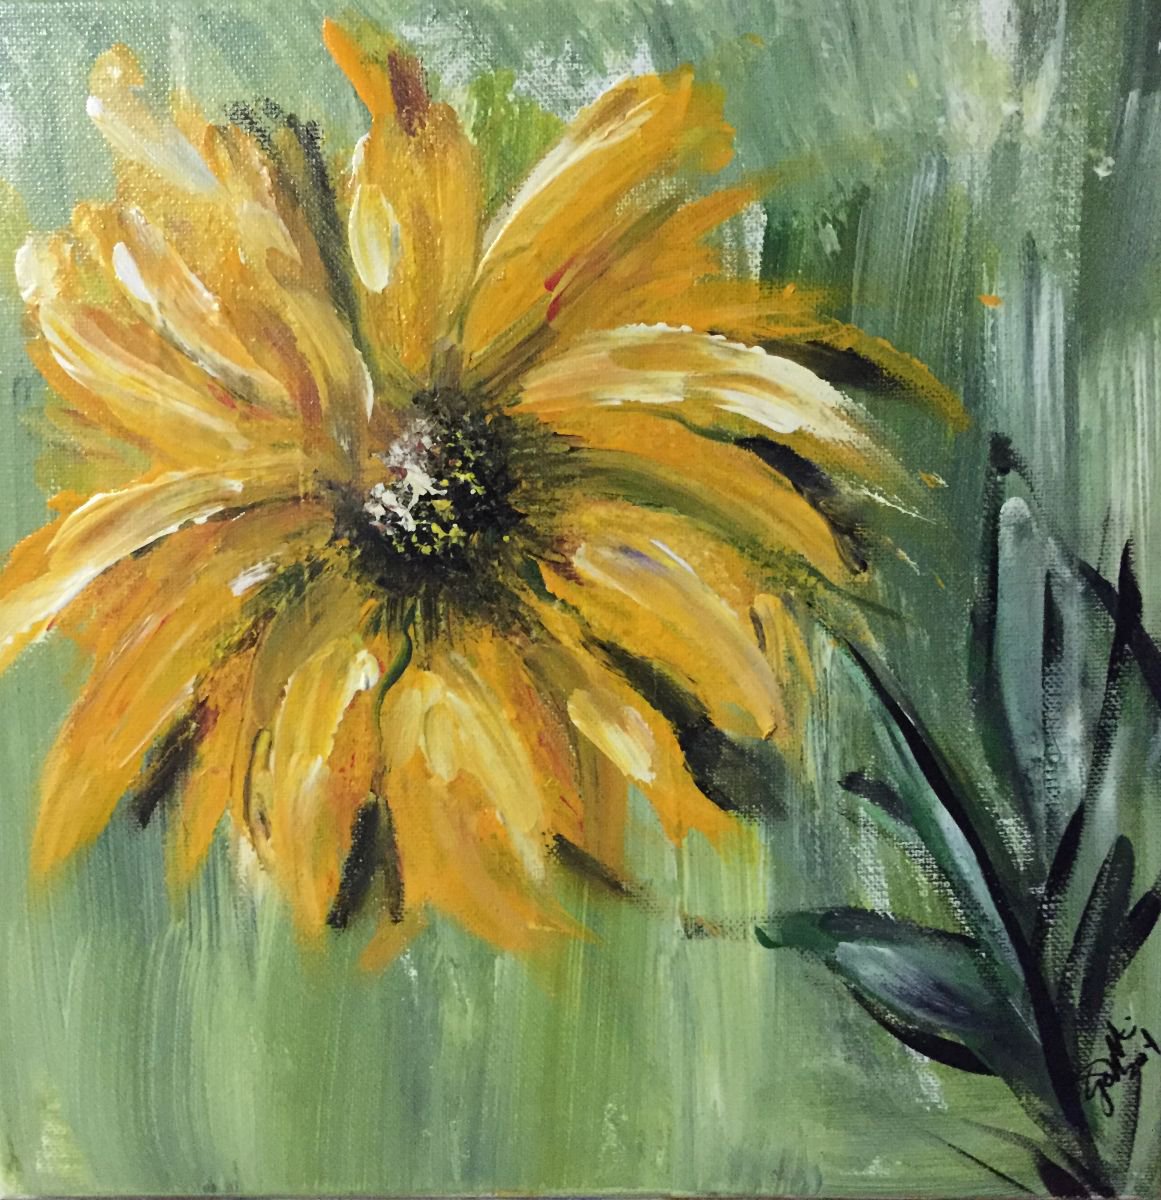 Yellow Flower #1 by Carolyn Shoemaker (Soma)